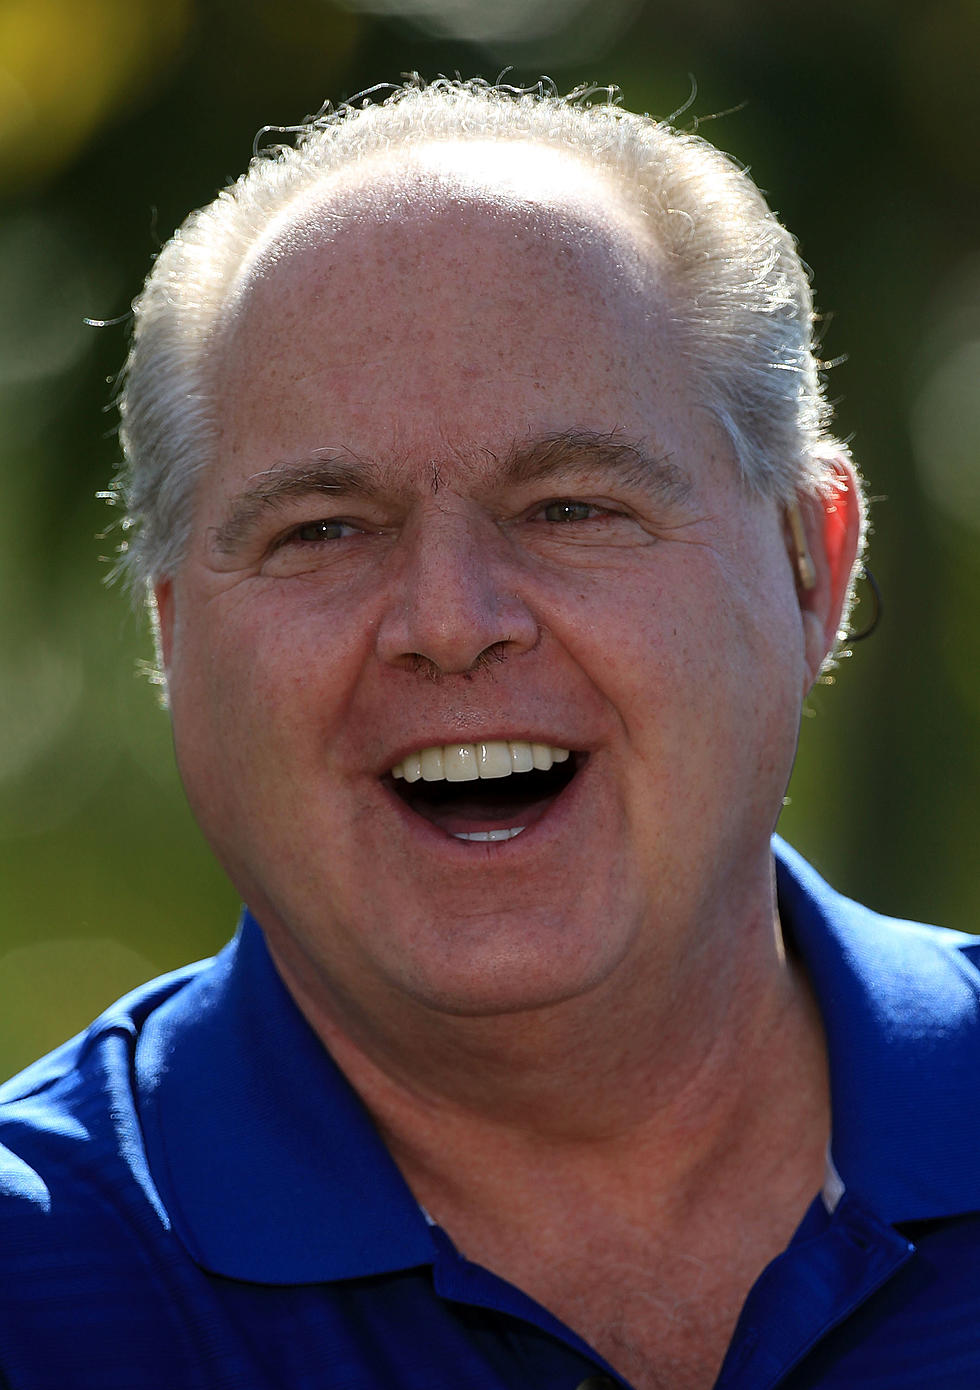 Rush Limbaugh Blaming Hip Hop For His Statement [THE BIG DUMMY FILES]